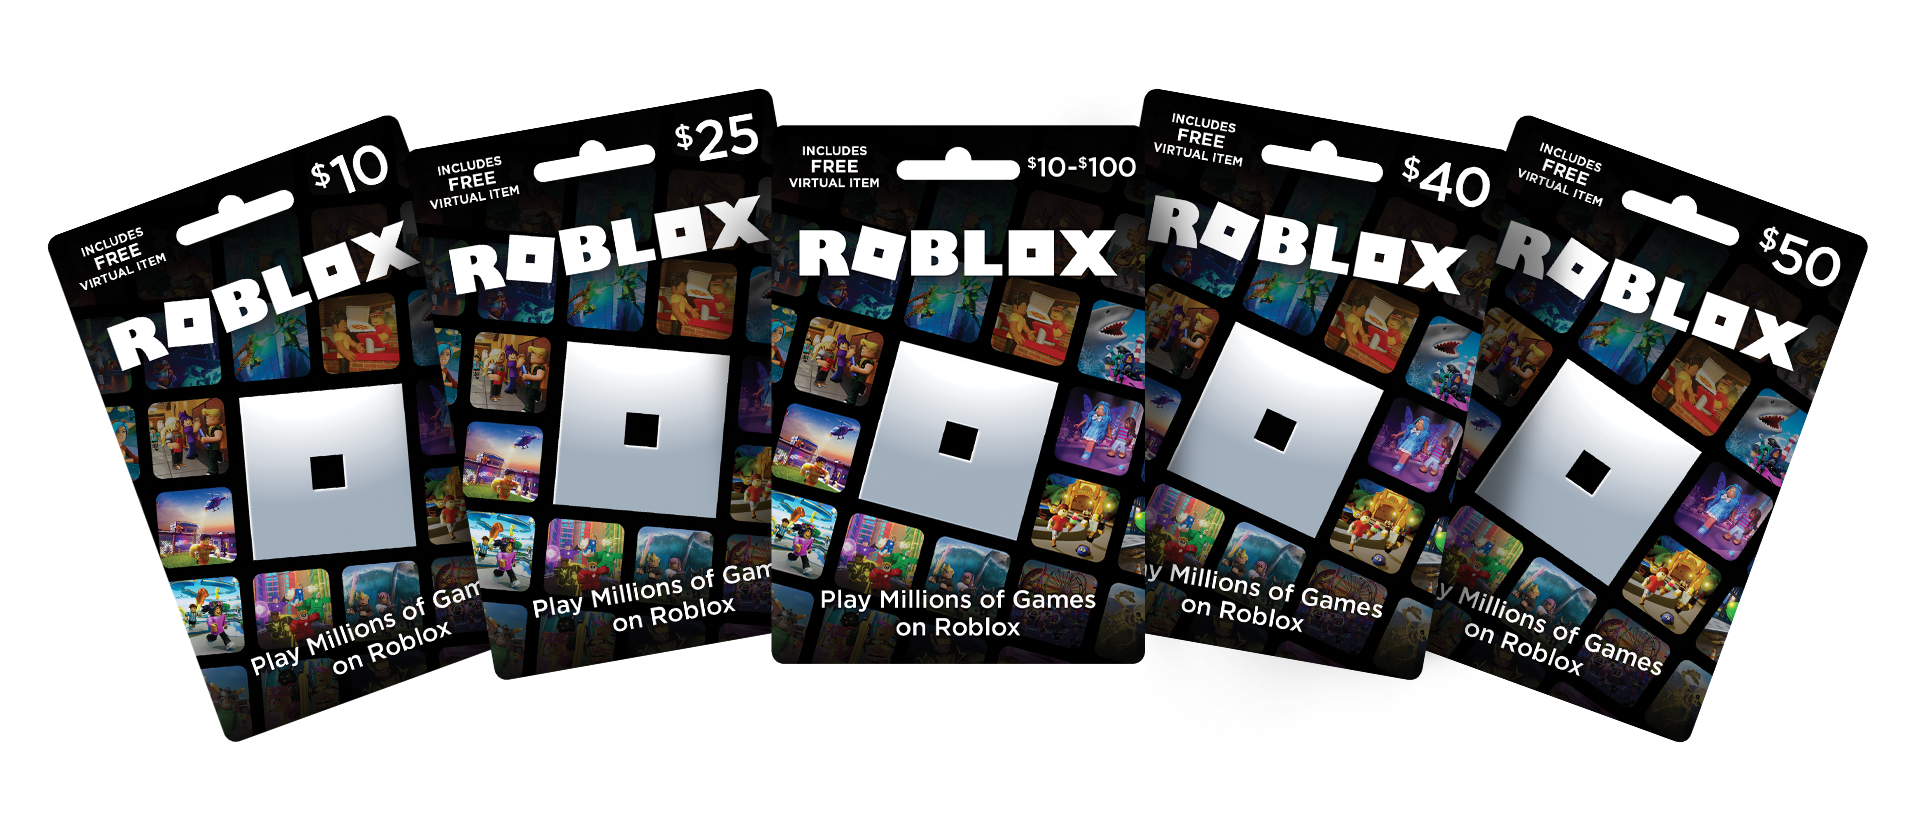 Roblox Game Card Walmart Online Discount Shop For Electronics Apparel Toys Books Games Computers Shoes Jewelry Watches Baby Products Sports Outdoors Office Products Bed Bath Furniture Tools Hardware Automotive - 10 dollar robux gift card walmart